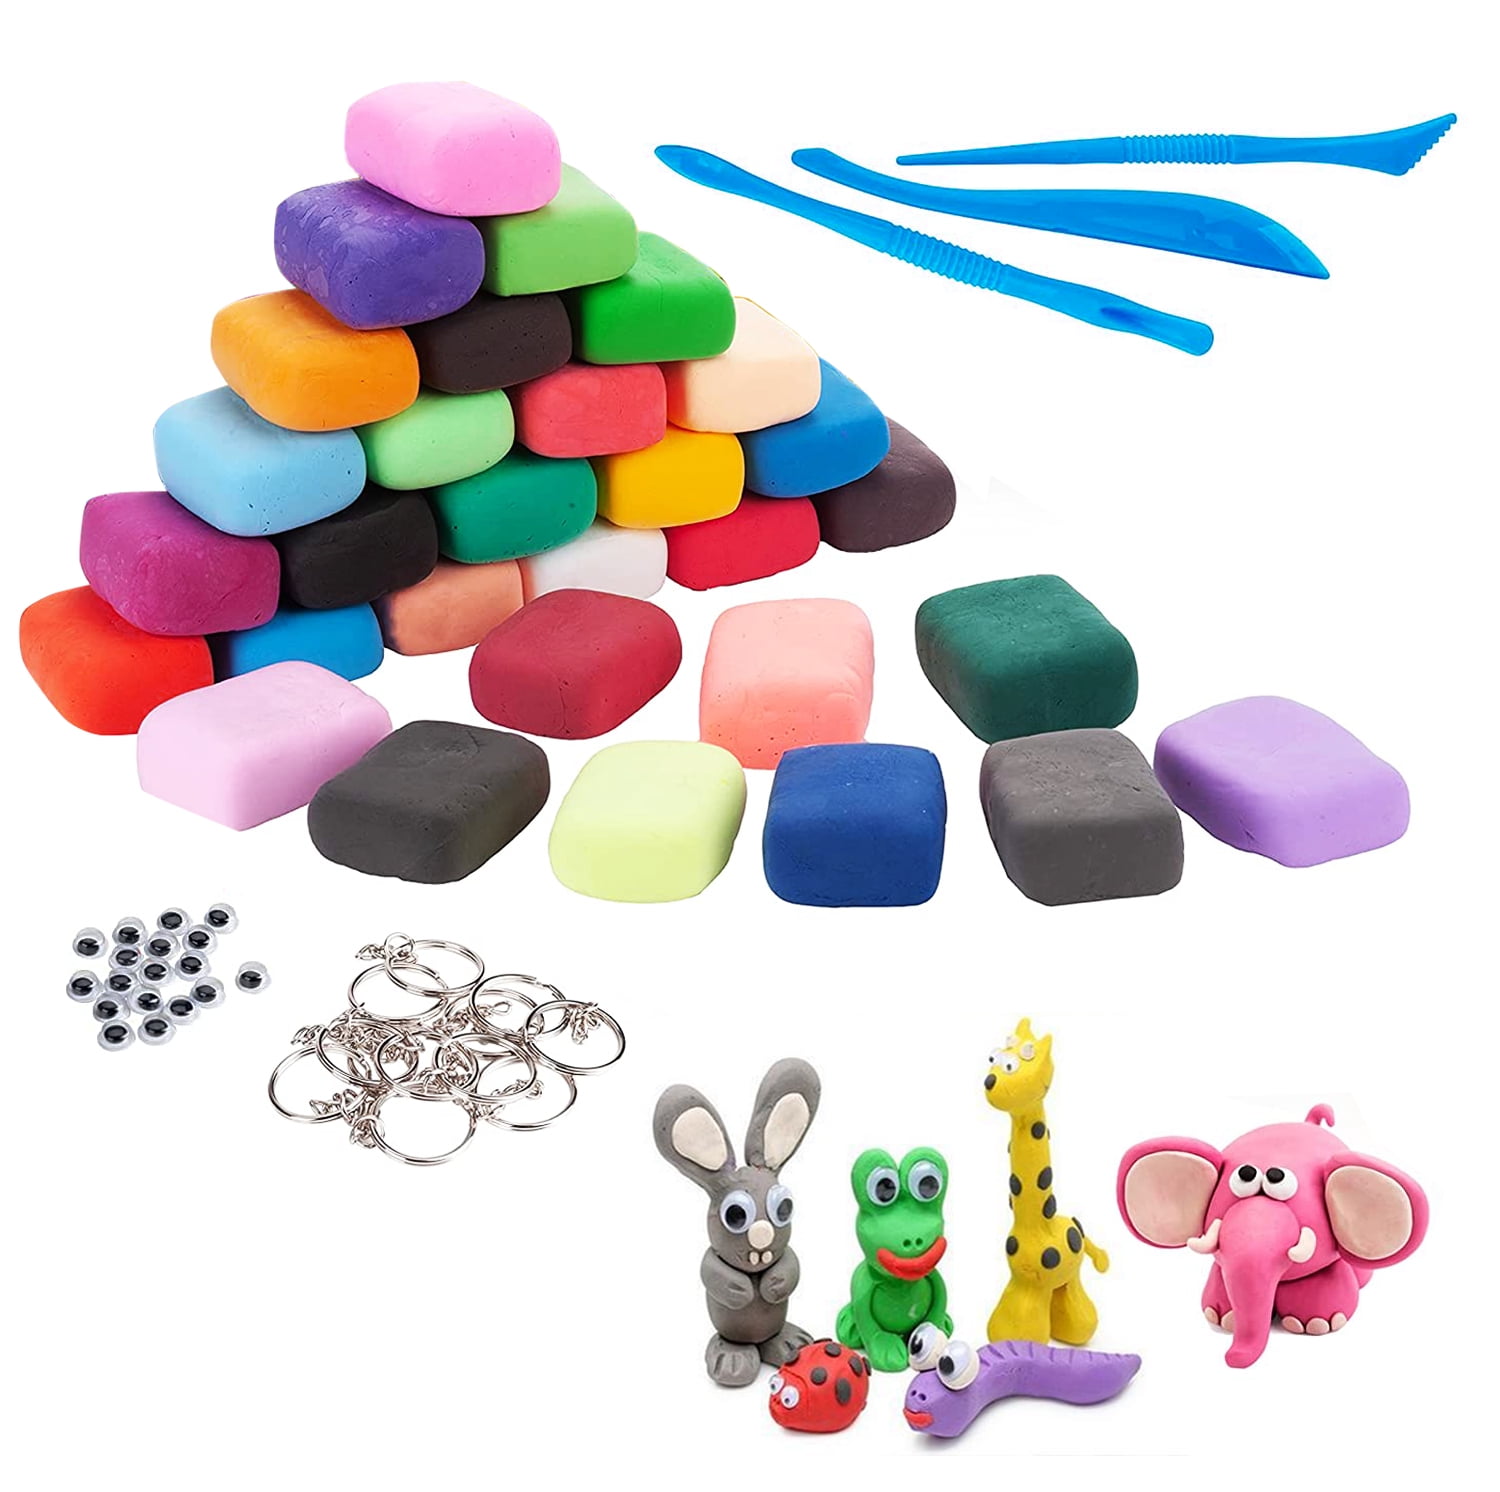 Air Dry Clay for Kids, 97-in-1 Clay Kit Set (36 Colors of Modeling Clay